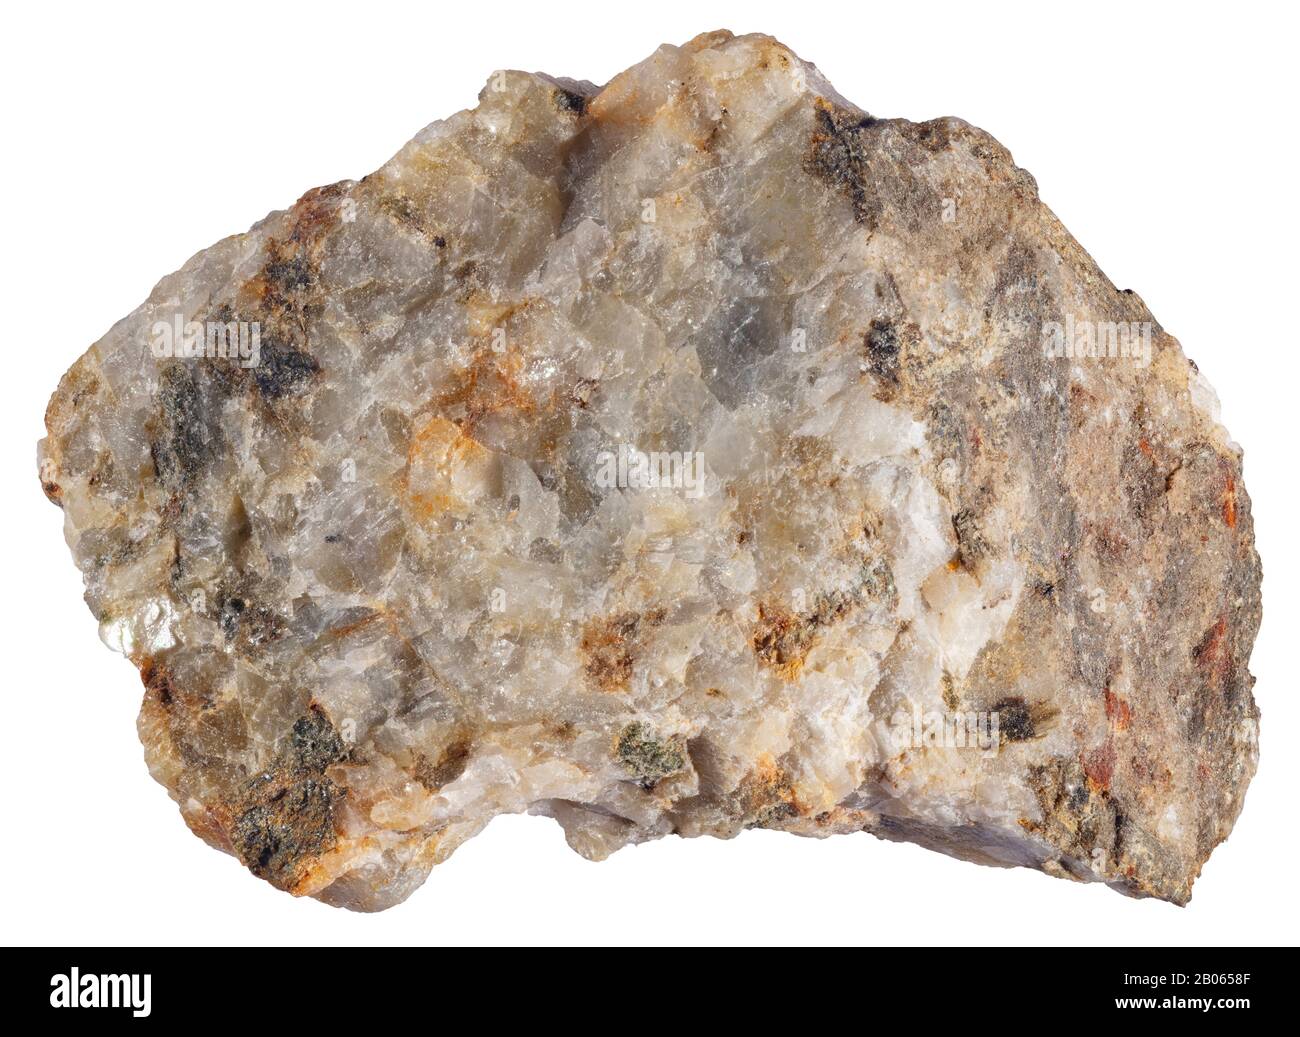 Calc-Silicate, Contact Metamorphism, Grenville, Quebec A calc–silicate rock is a rock produced by metasomatic alteration. Stock Photo